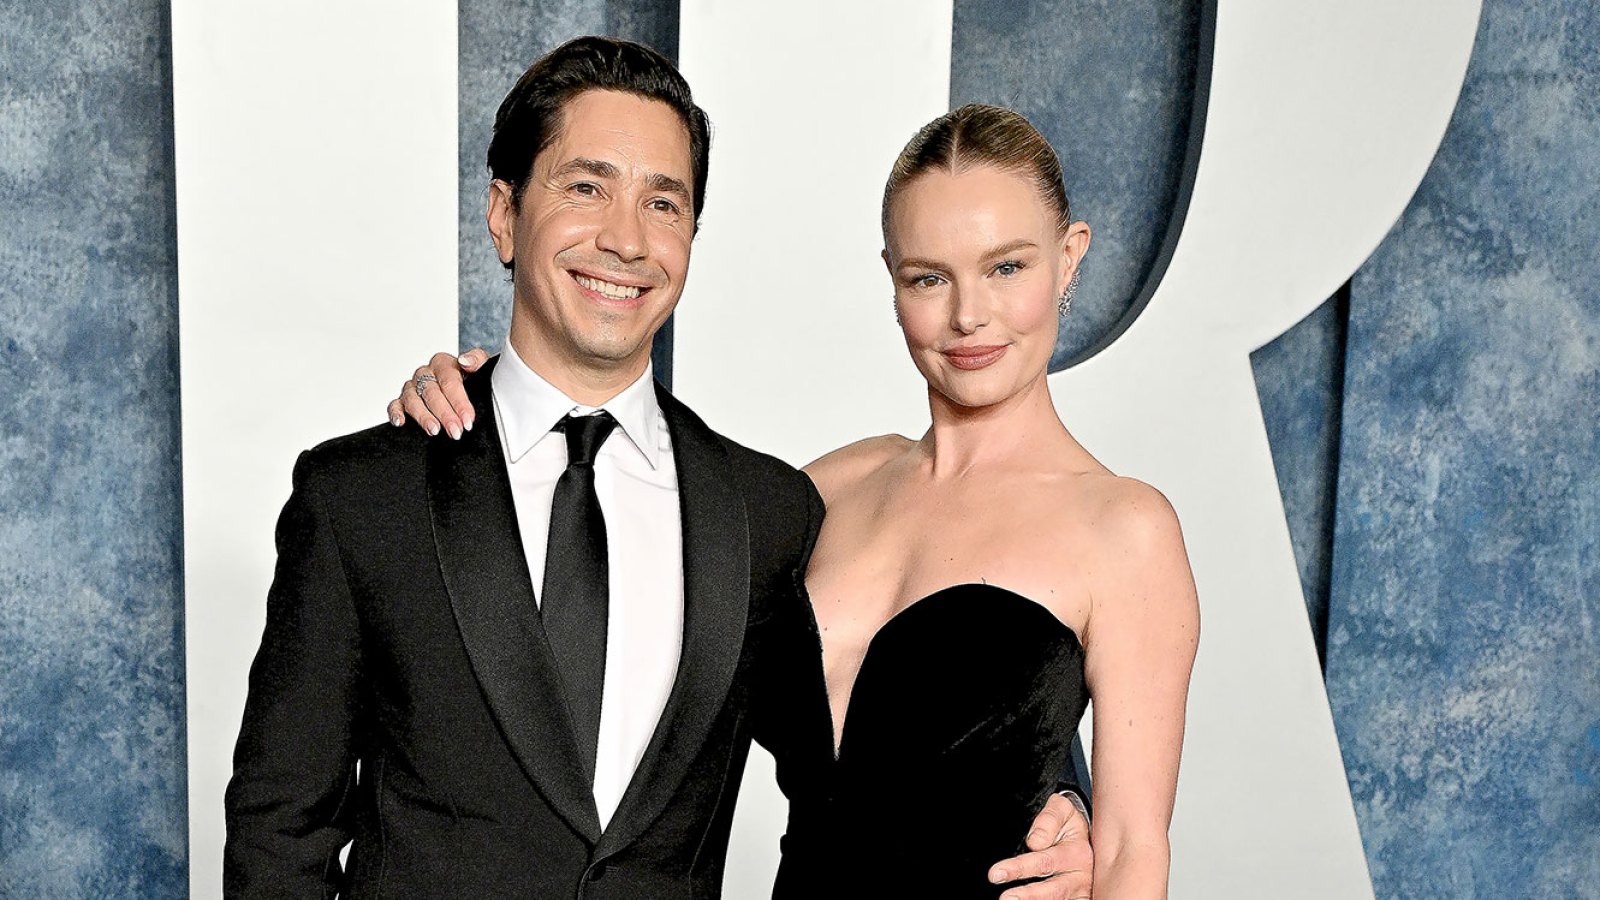 Justin Long Hints He Wants Kids With Kate Bosworth in Birthday Tribute